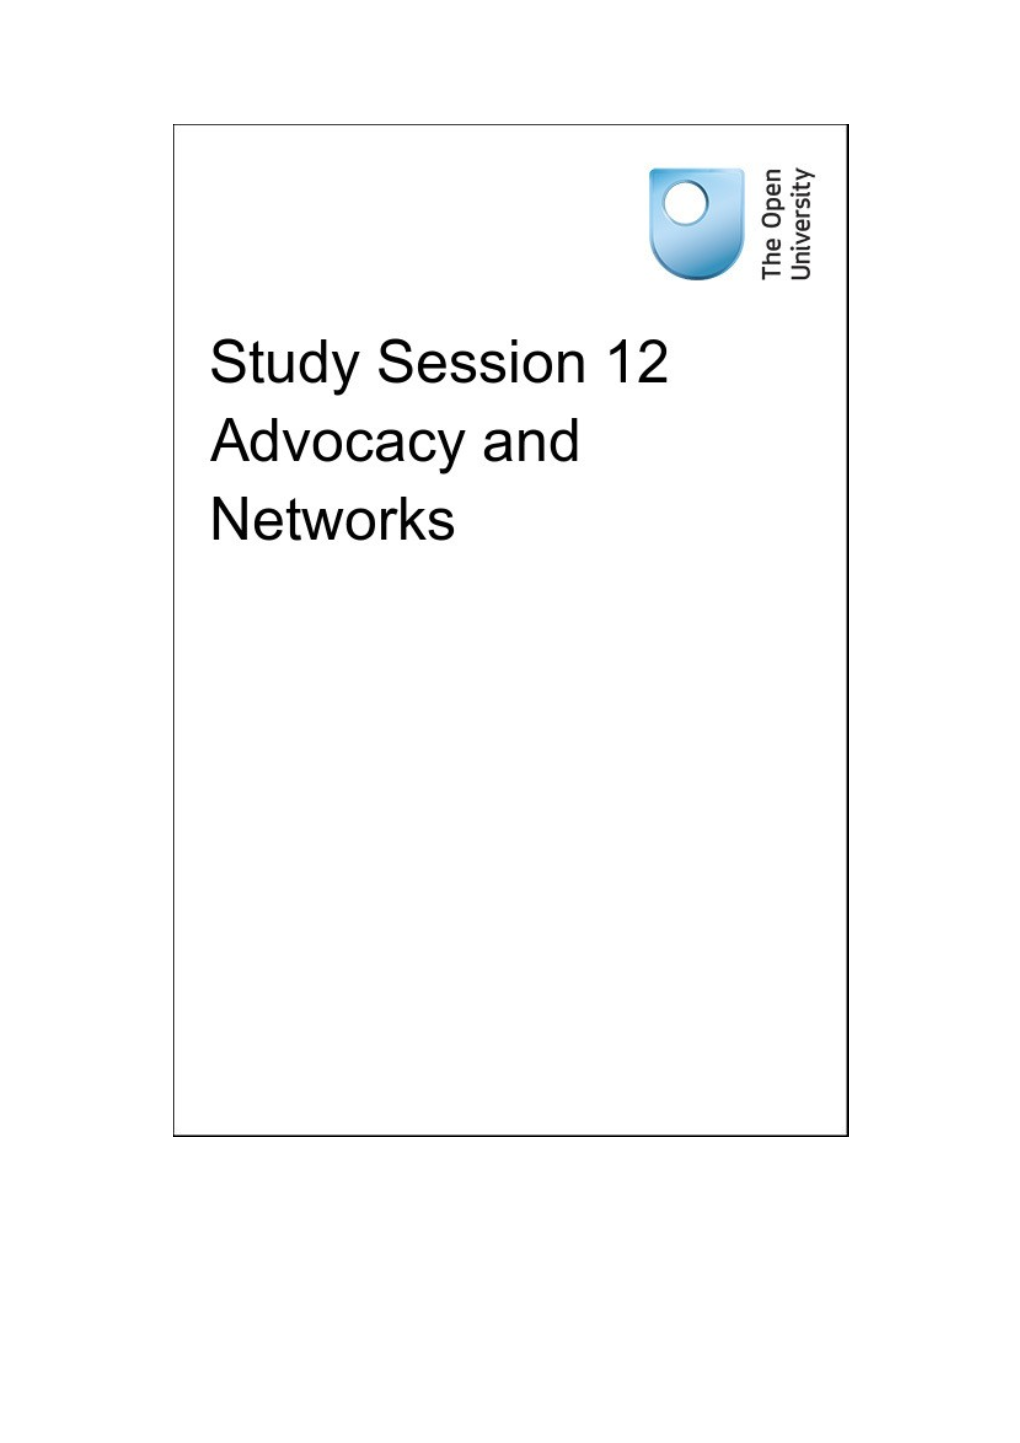 Study Session 12 Advocacy and Networks